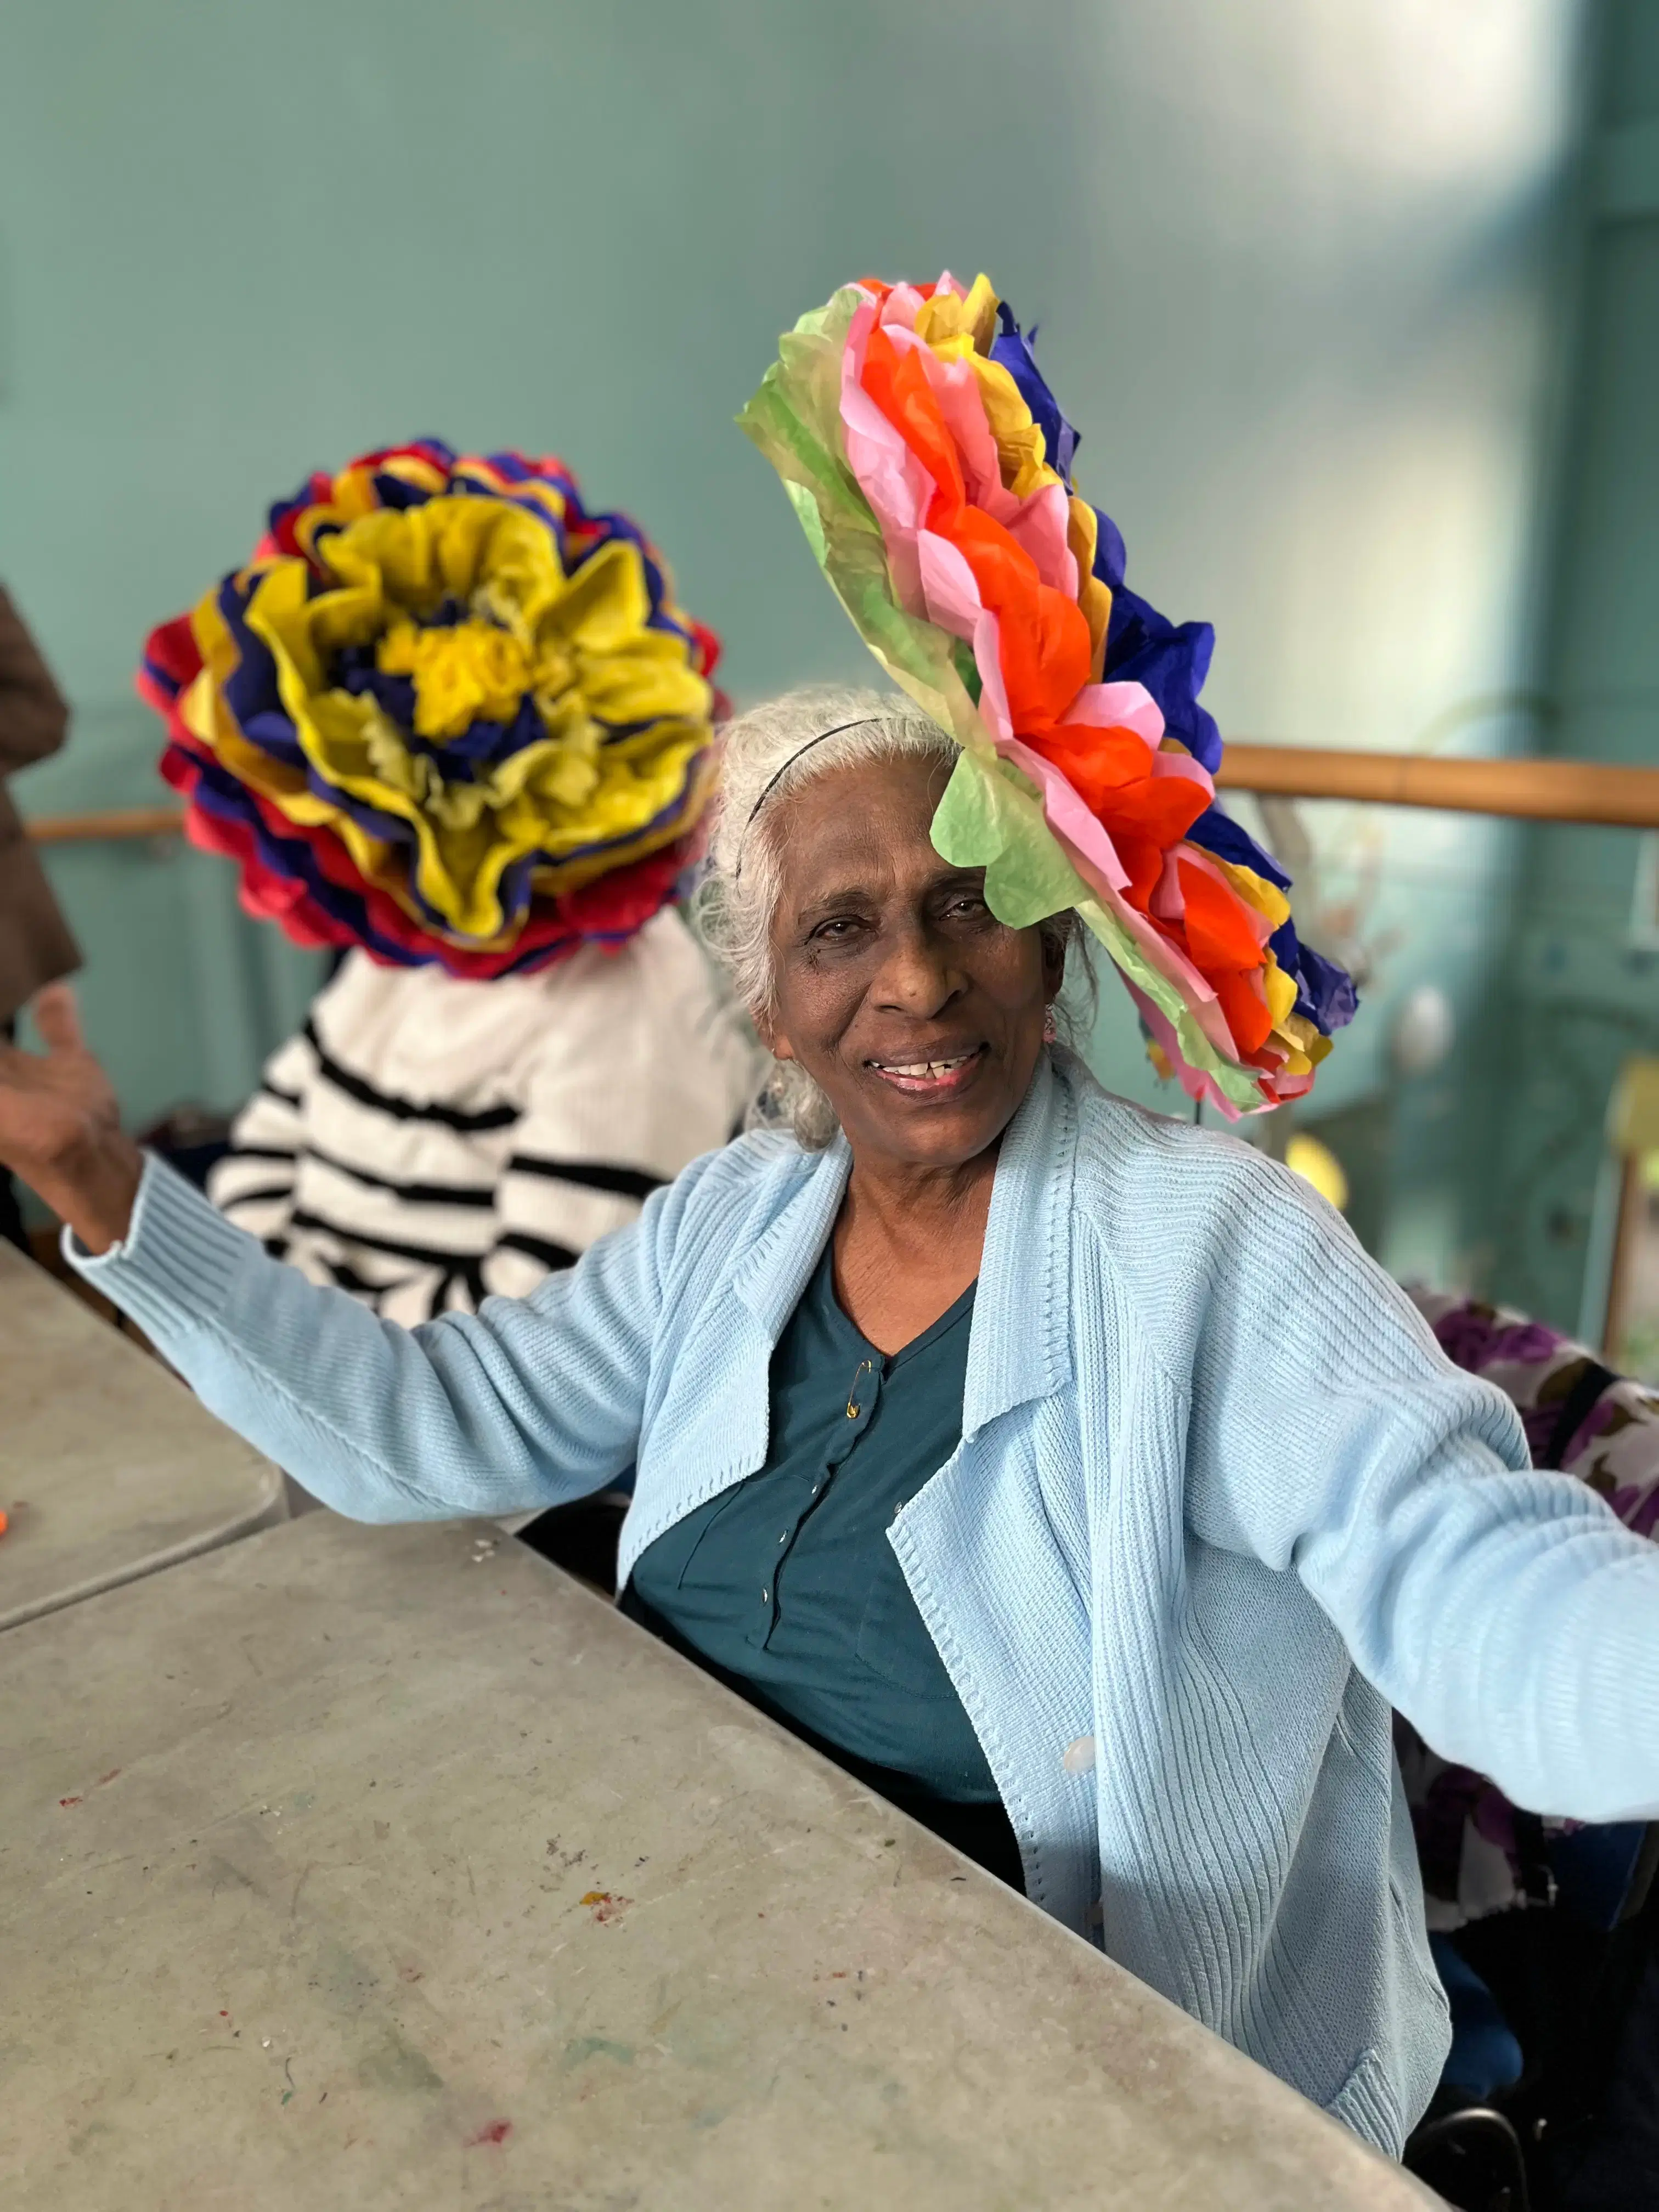 A joyful elderly woman with a vibrant, multicolored paper flower hat, smiling warmly and posing for a picture.